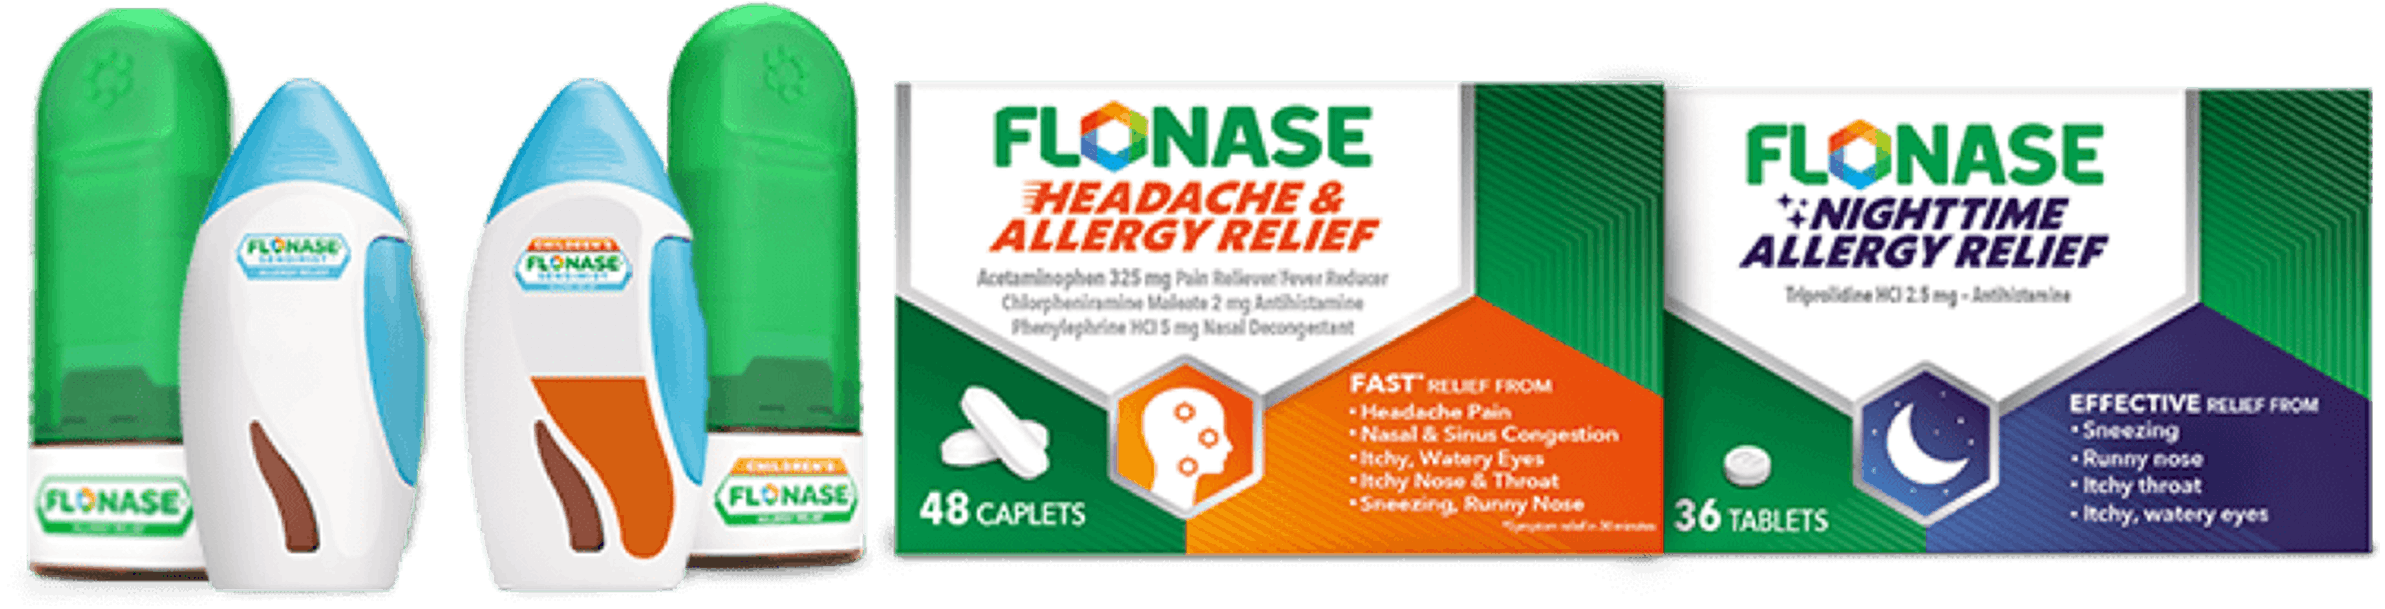 Flonase allergy relief products